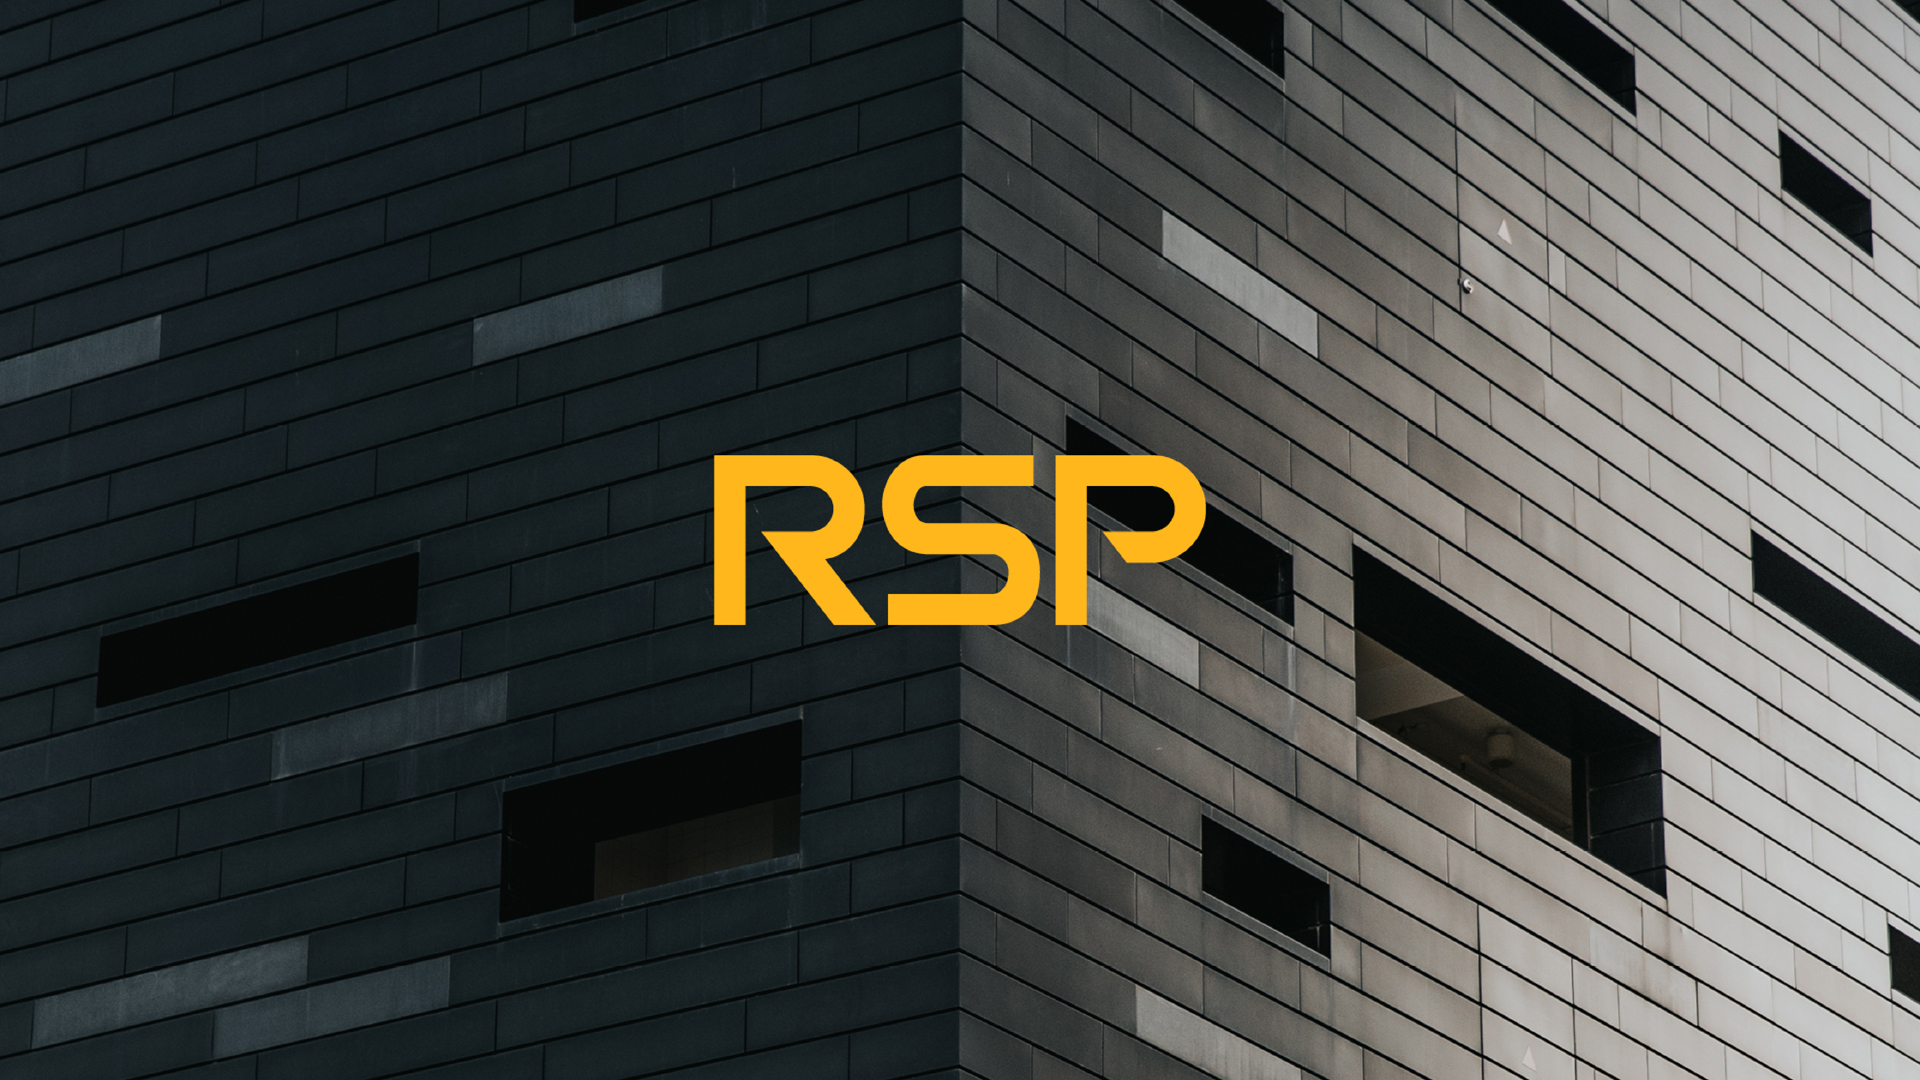 Equus Design Consultancy Appointed to Rebrand RSP